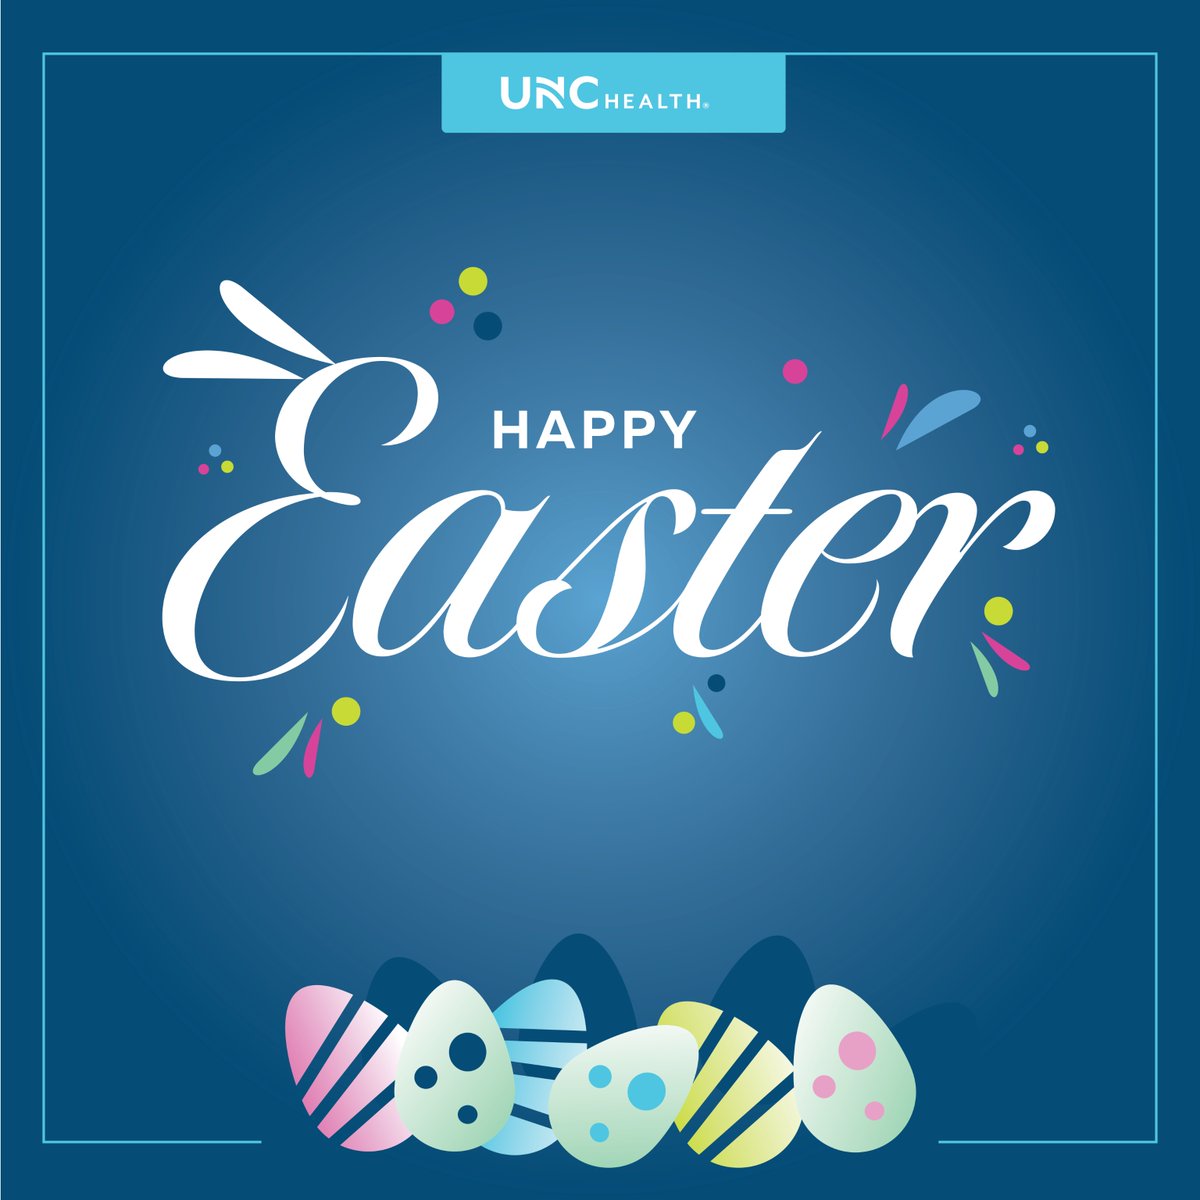 Happy Easter to all who celebrate! #OneGreatTeam